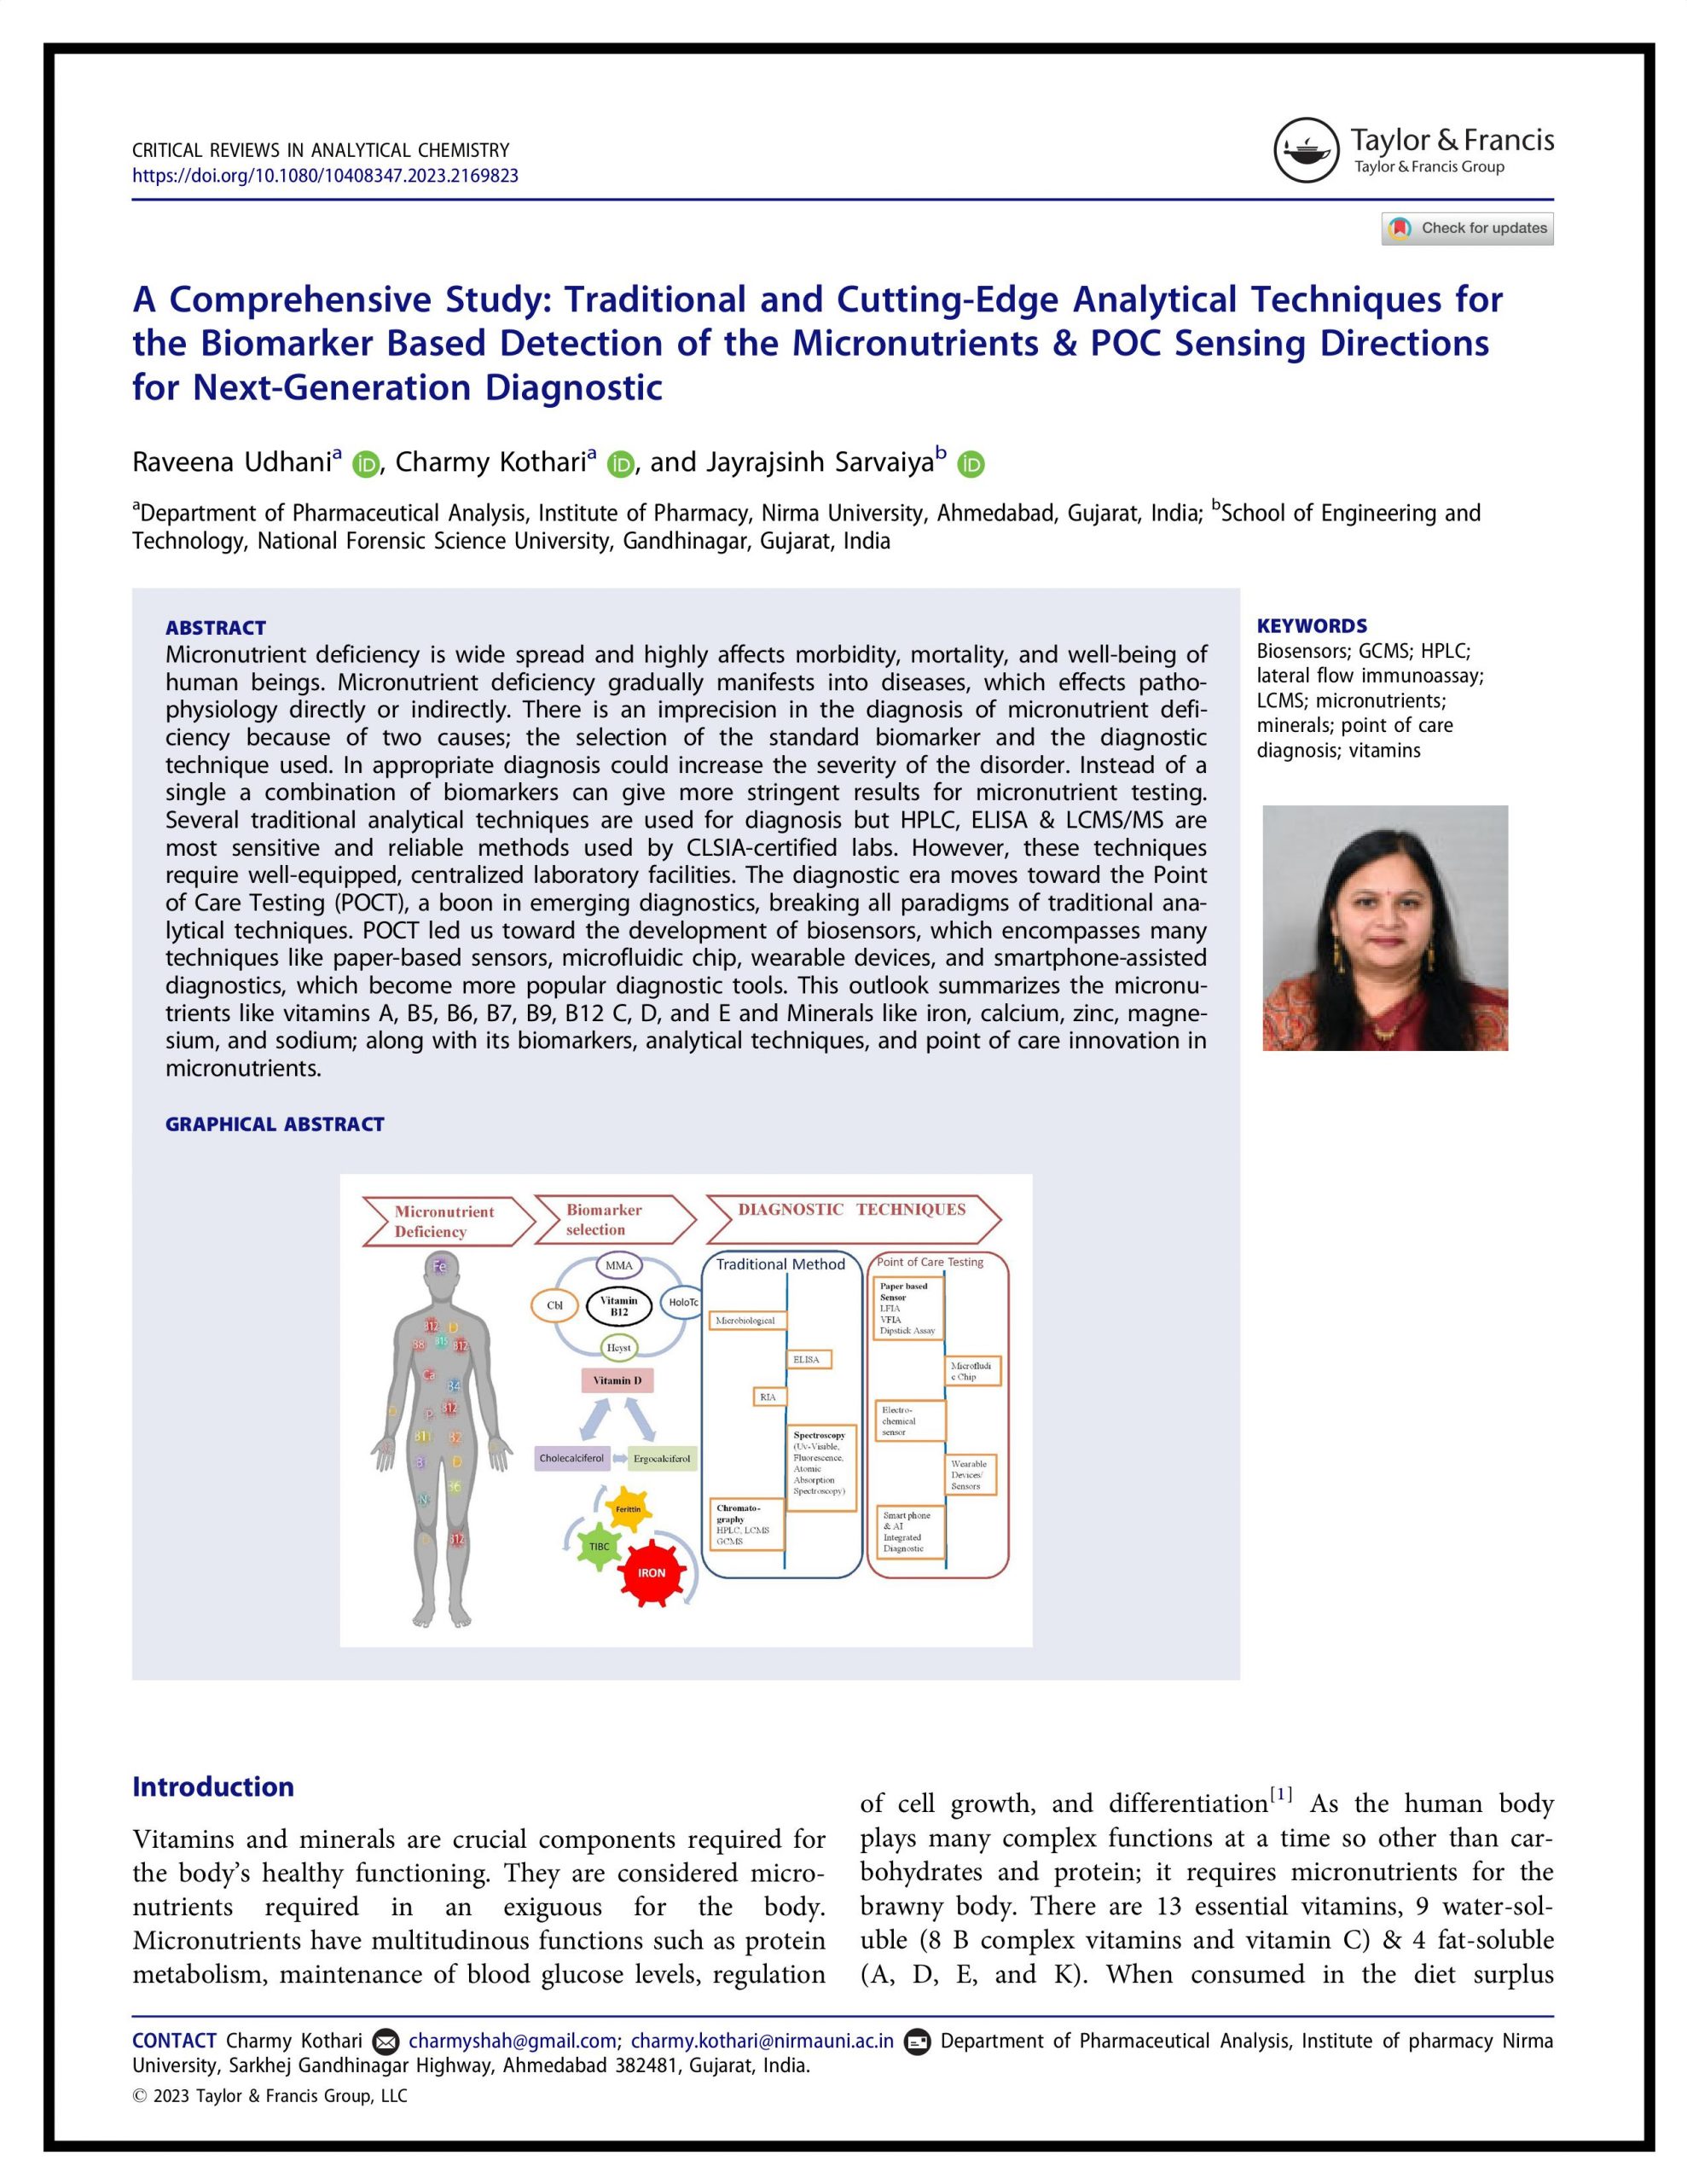 A Comprehensive Study: Traditional and Cutting-Edge Analytical Techniques for the Biomarker Based Detection of the Micronutrients & POC Sensing Directions for Next-Generation Diagnostic